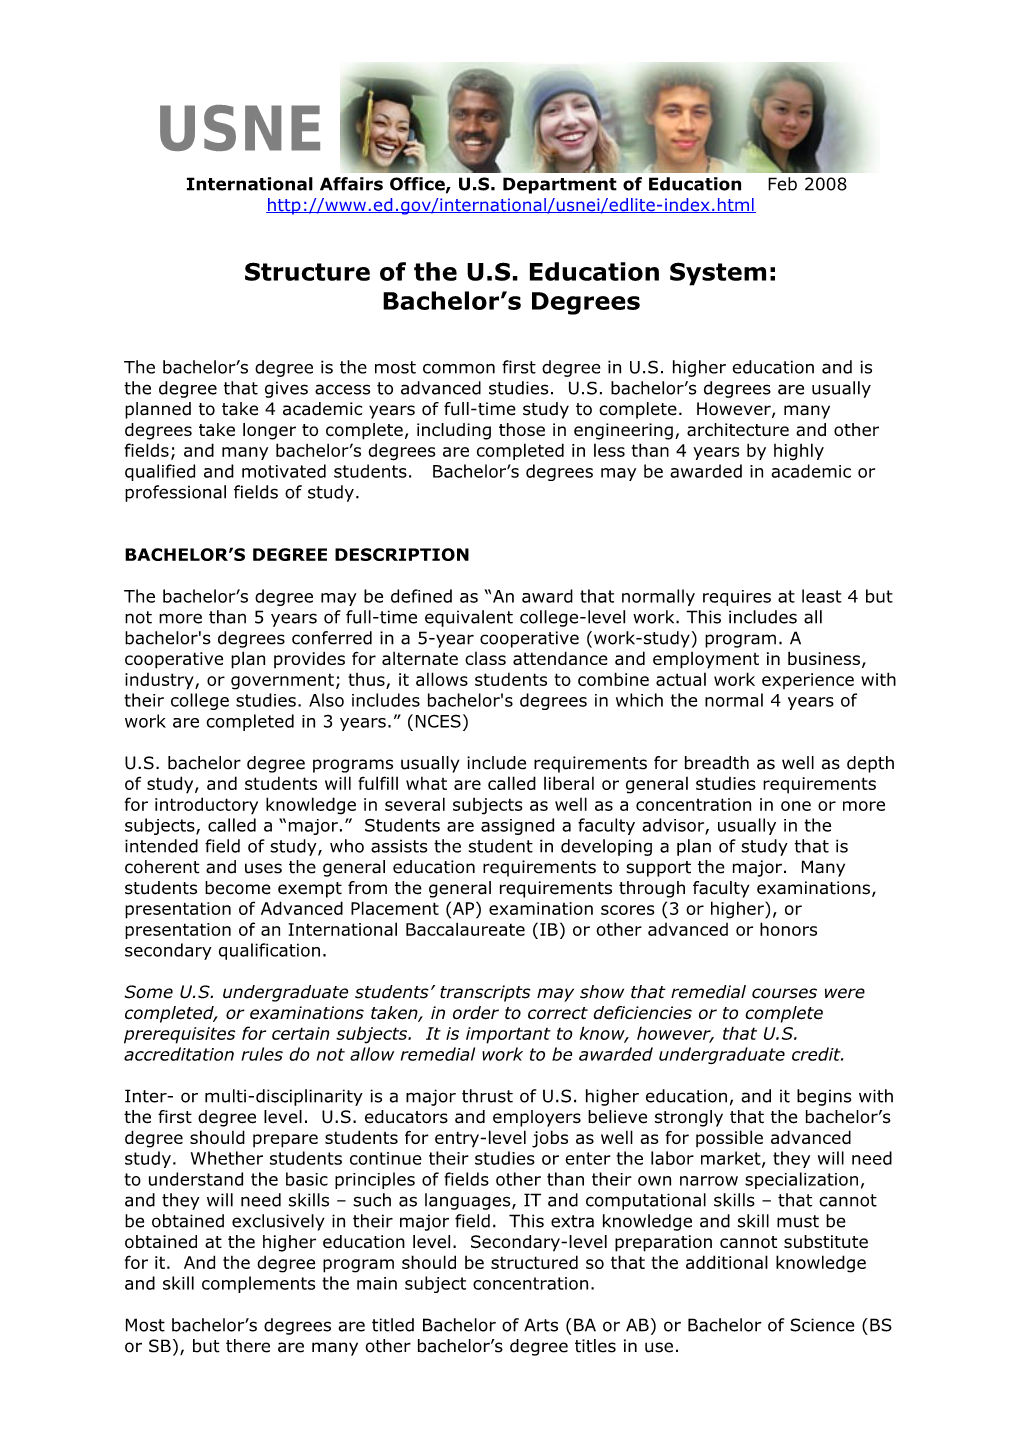 Structure of the U.S. Education System: Bachelor's Degrees (MS Word)